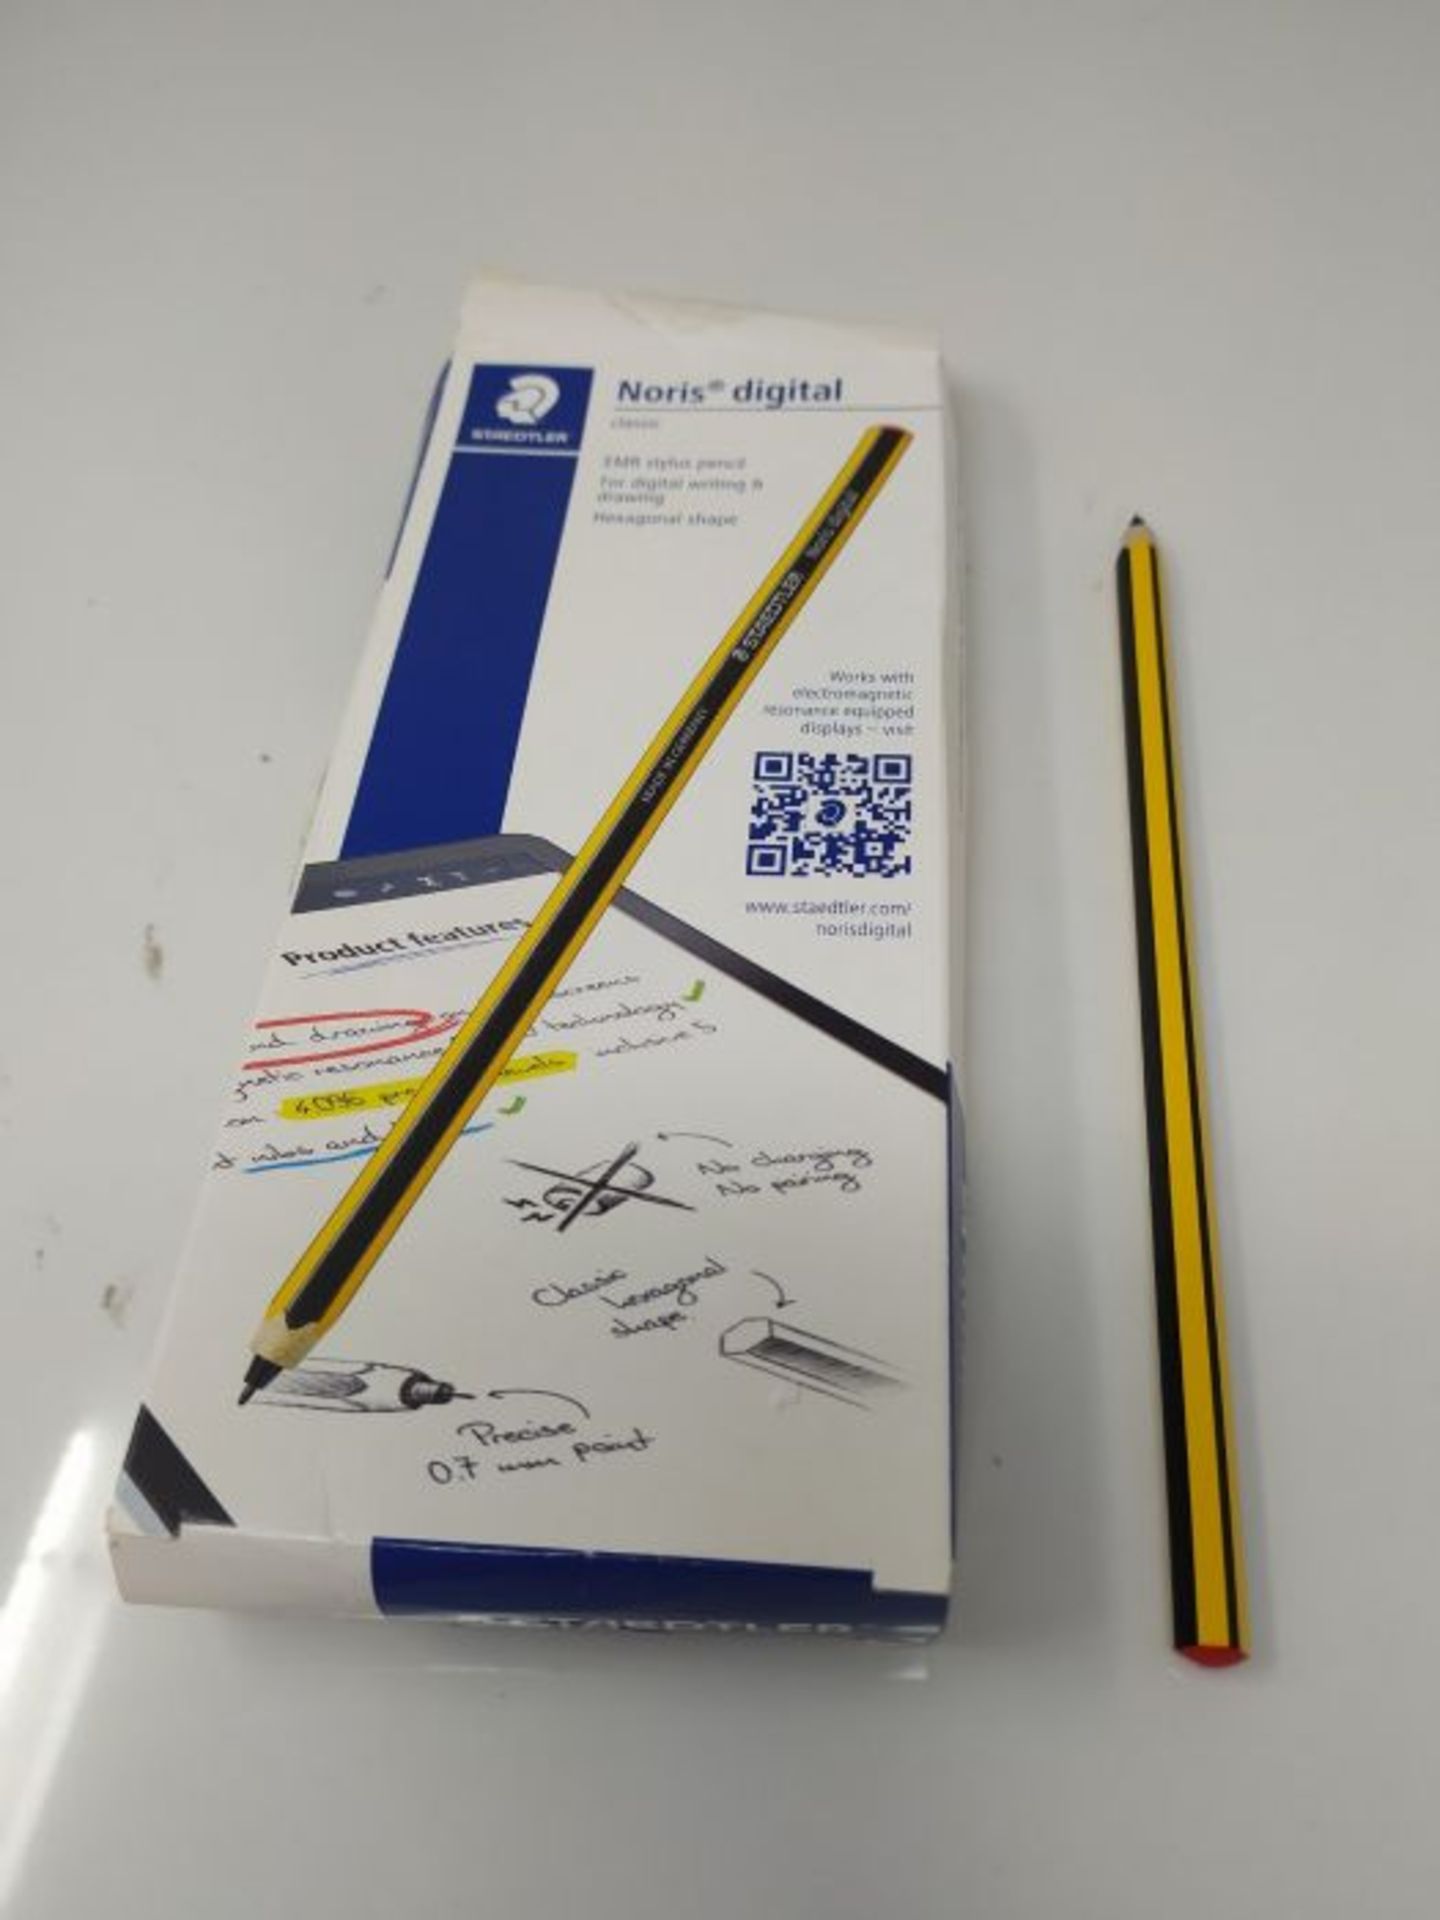 STAEDTLER Noris digital classic 180 22 EMR Stylus for Digital Writing and Drawing on E - Image 2 of 2